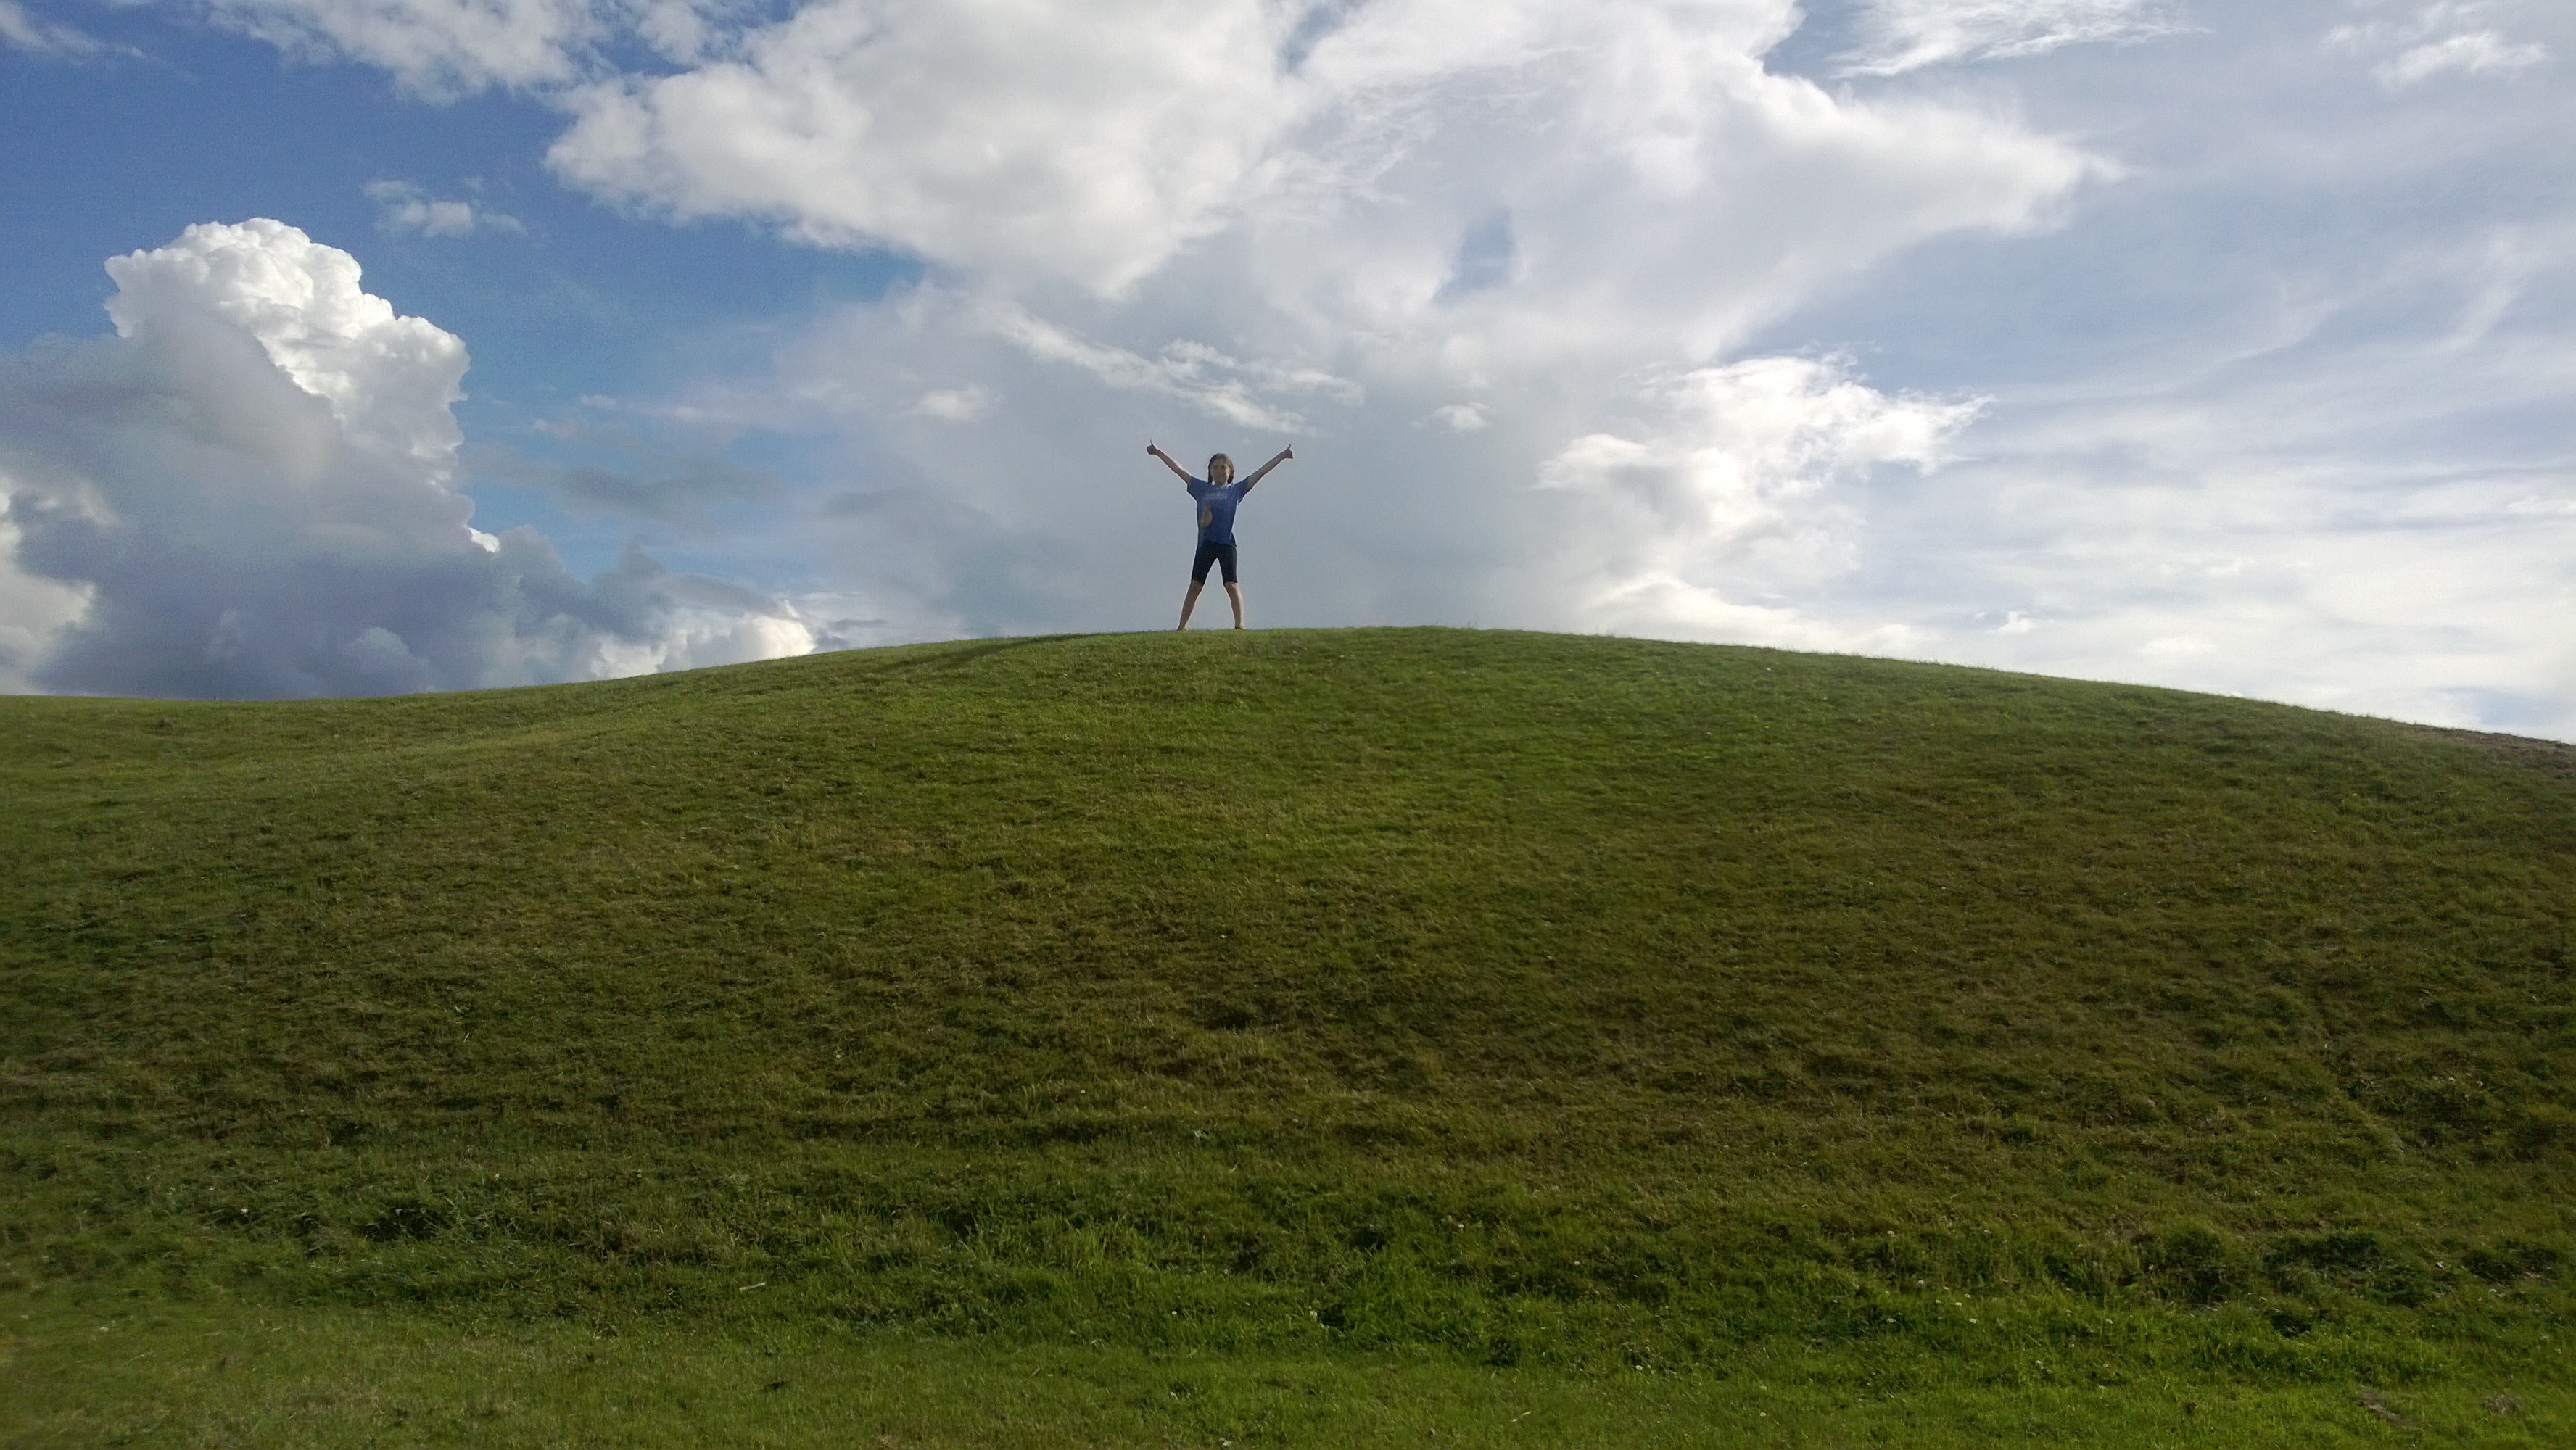 The Role of the Hill in Children’s Summer Holidays | DEBBIE YOUNG39;S 